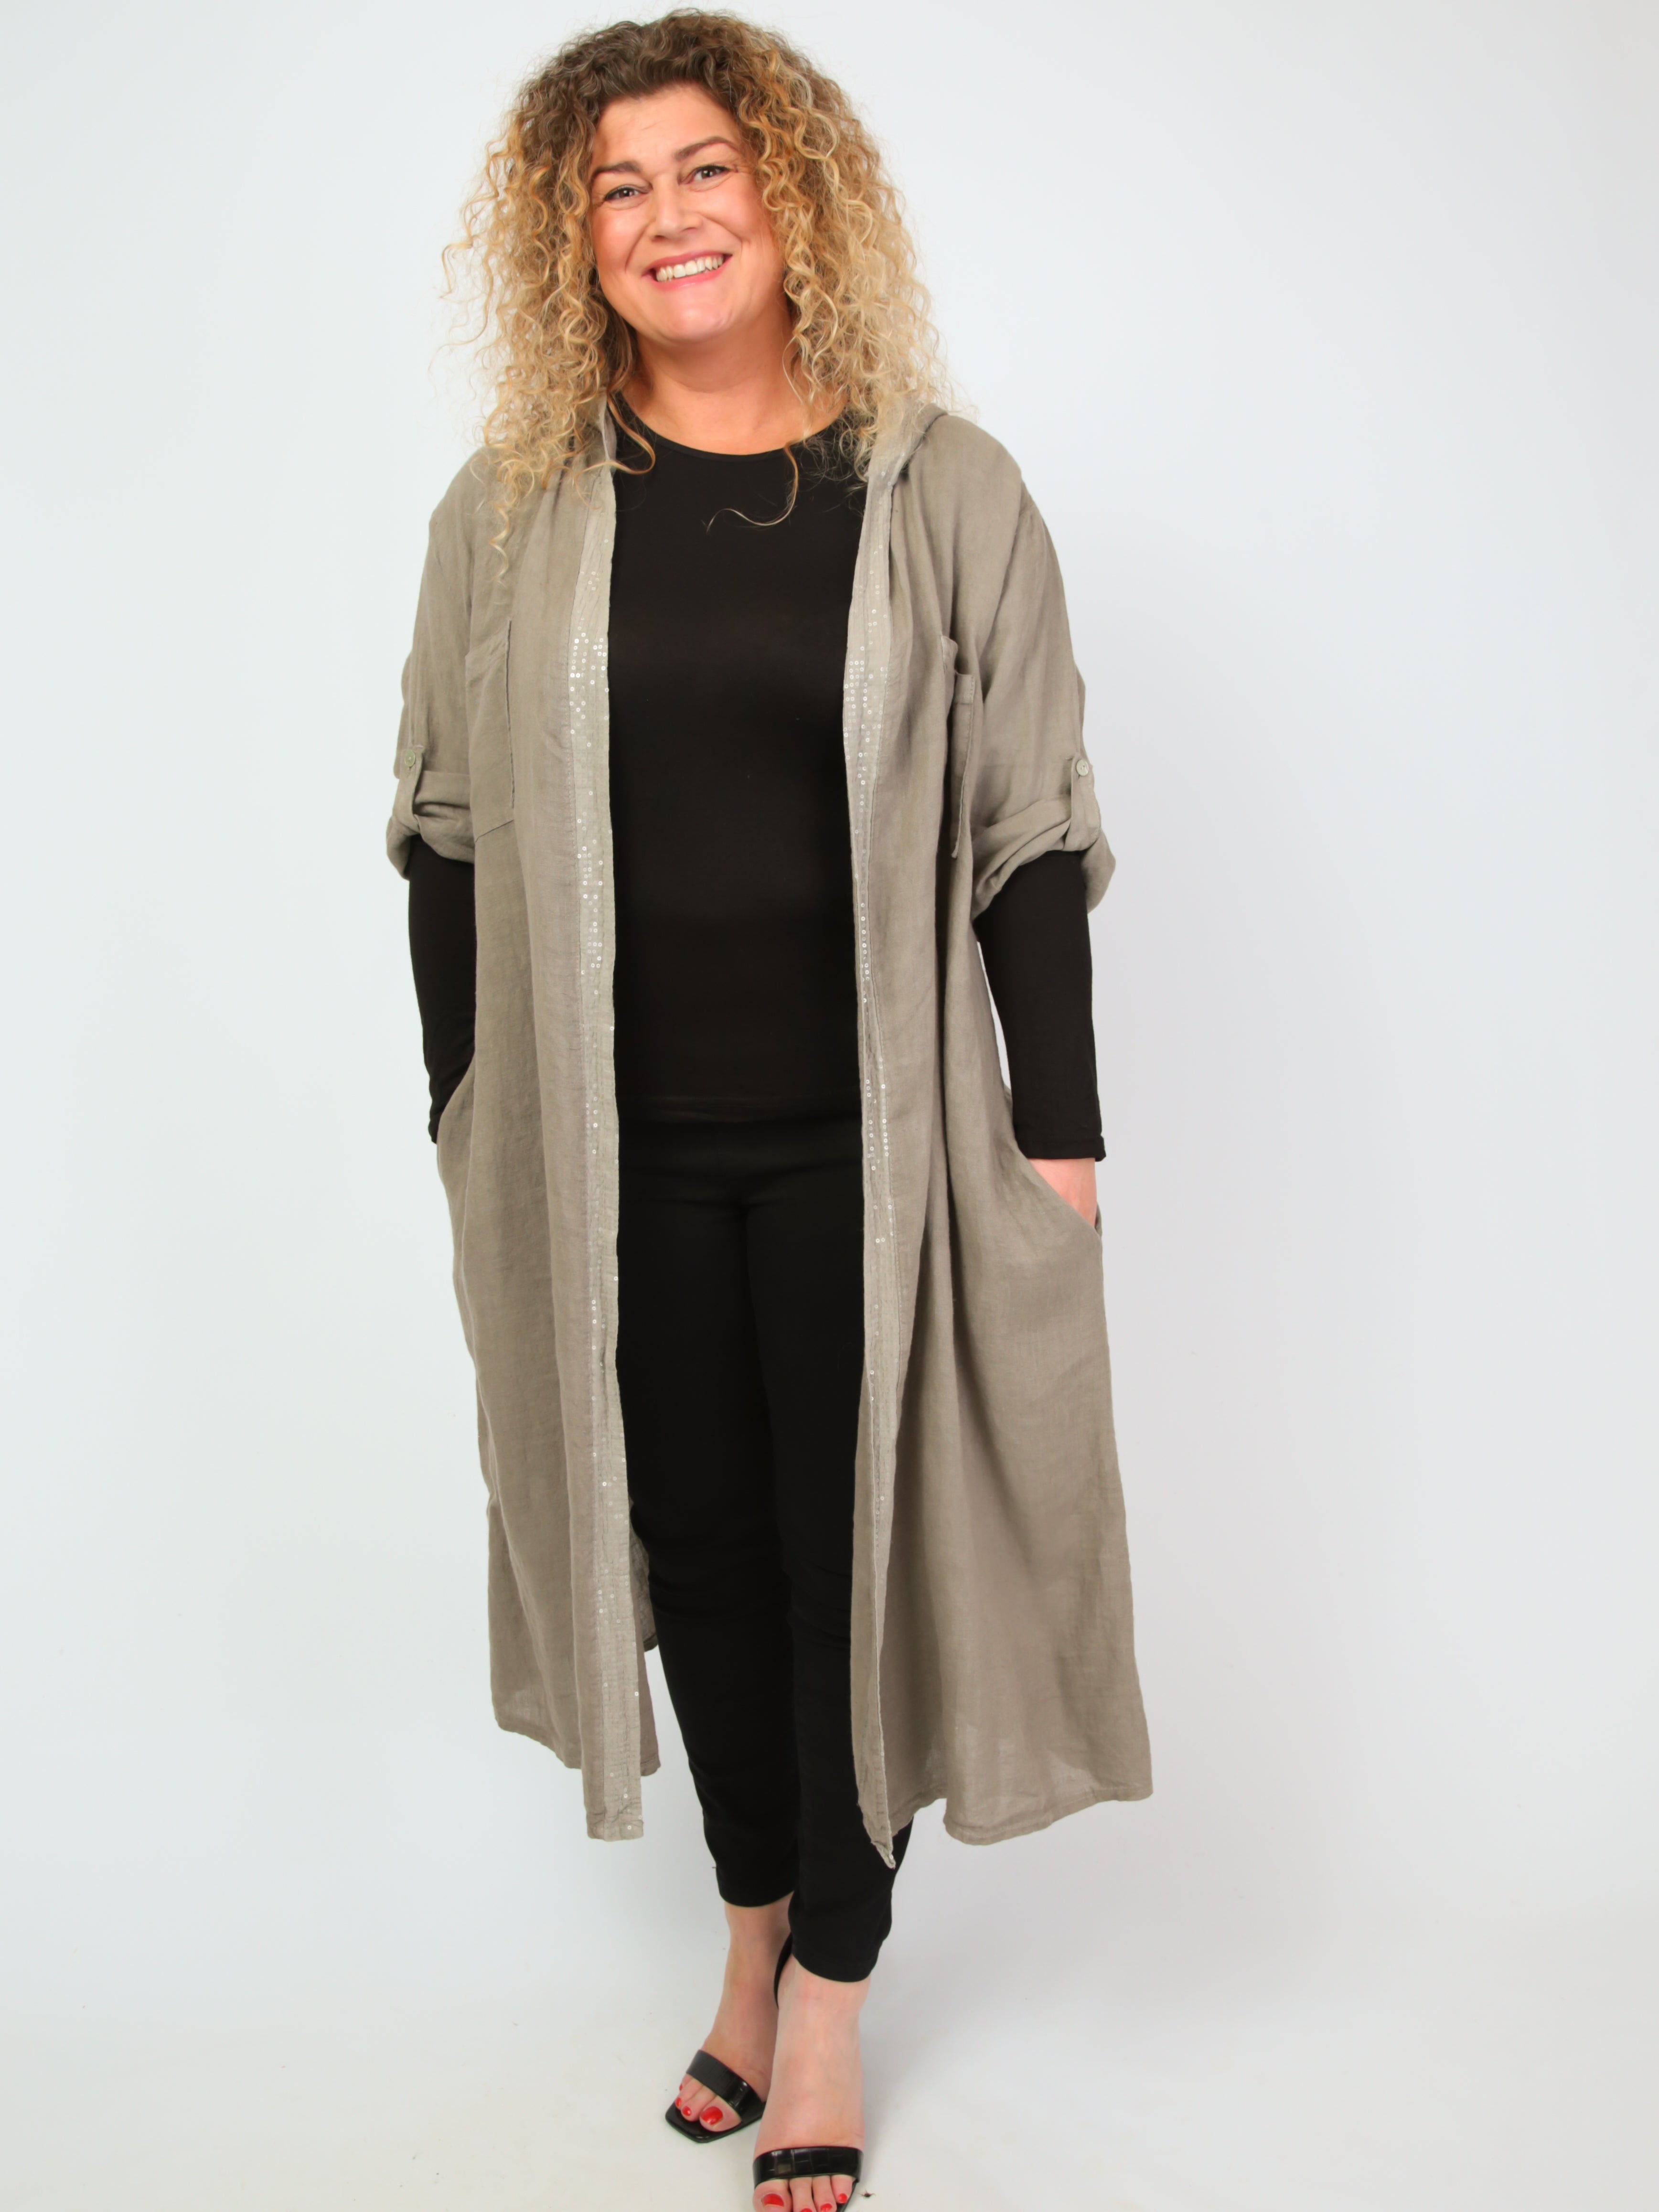 Krone 1 linen coat with lace and sequins